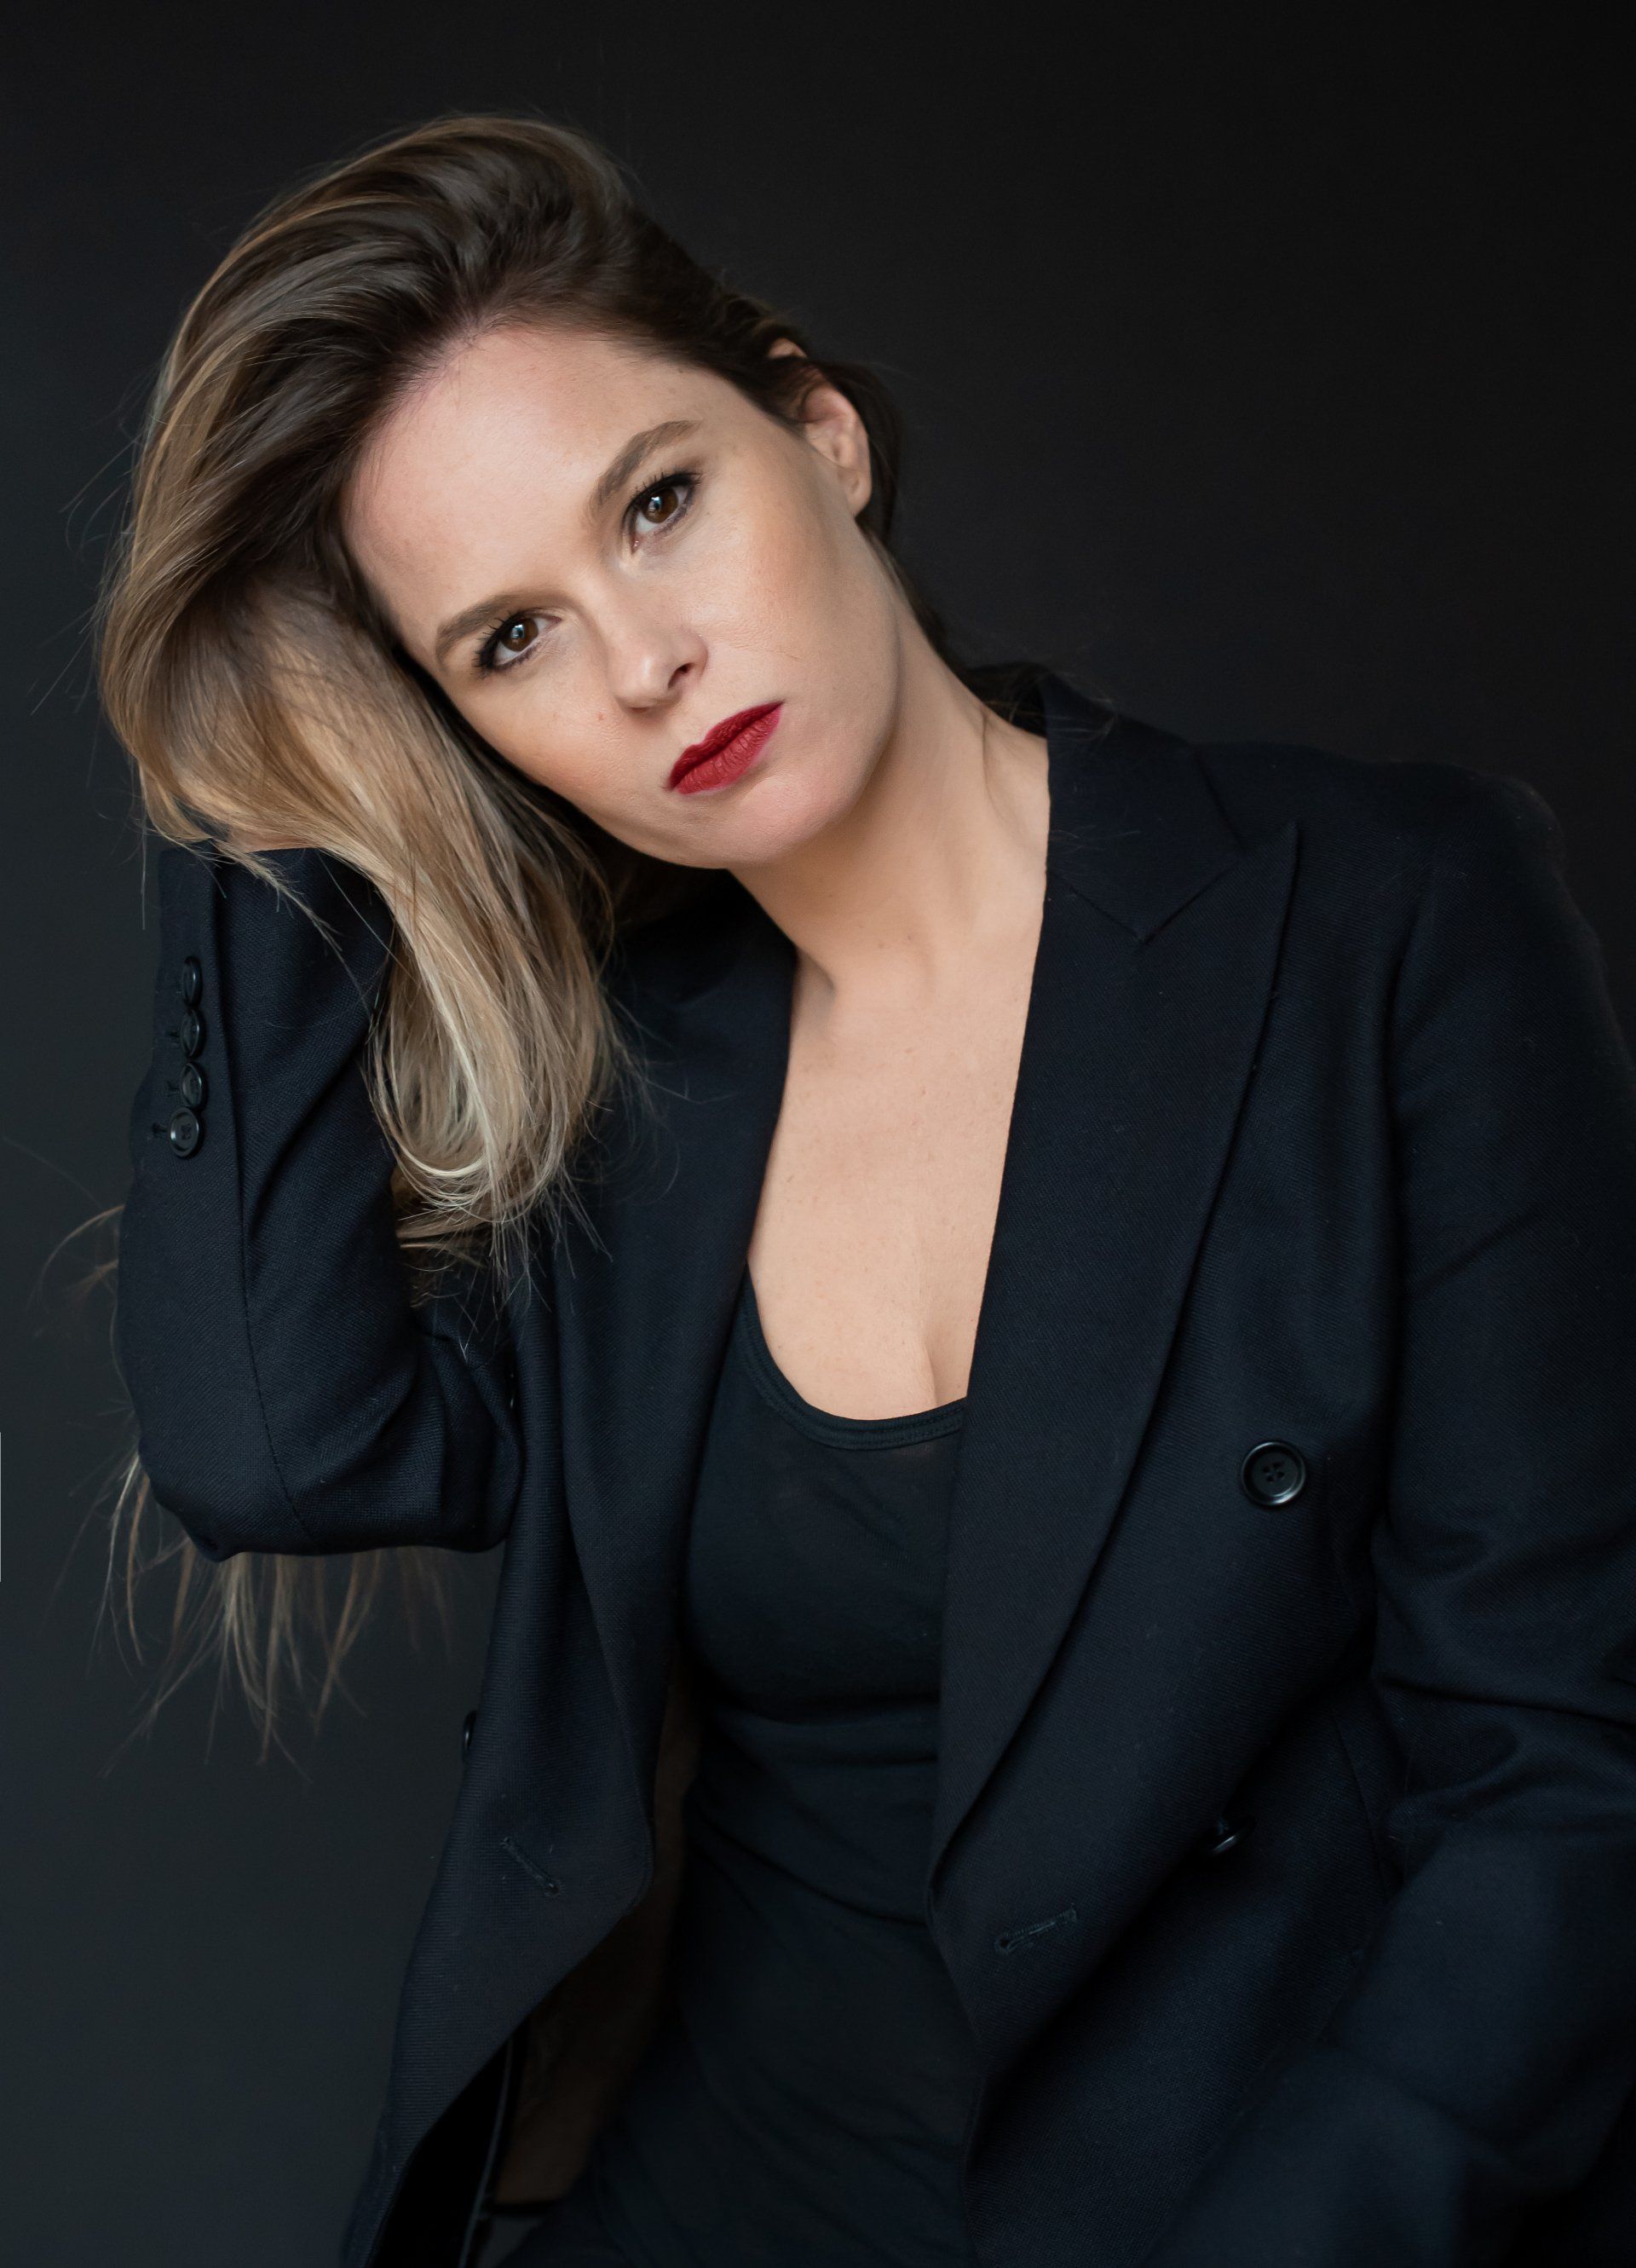 Portrait Photography | Stacey Naglie Toronto  | Woman with dark jacket